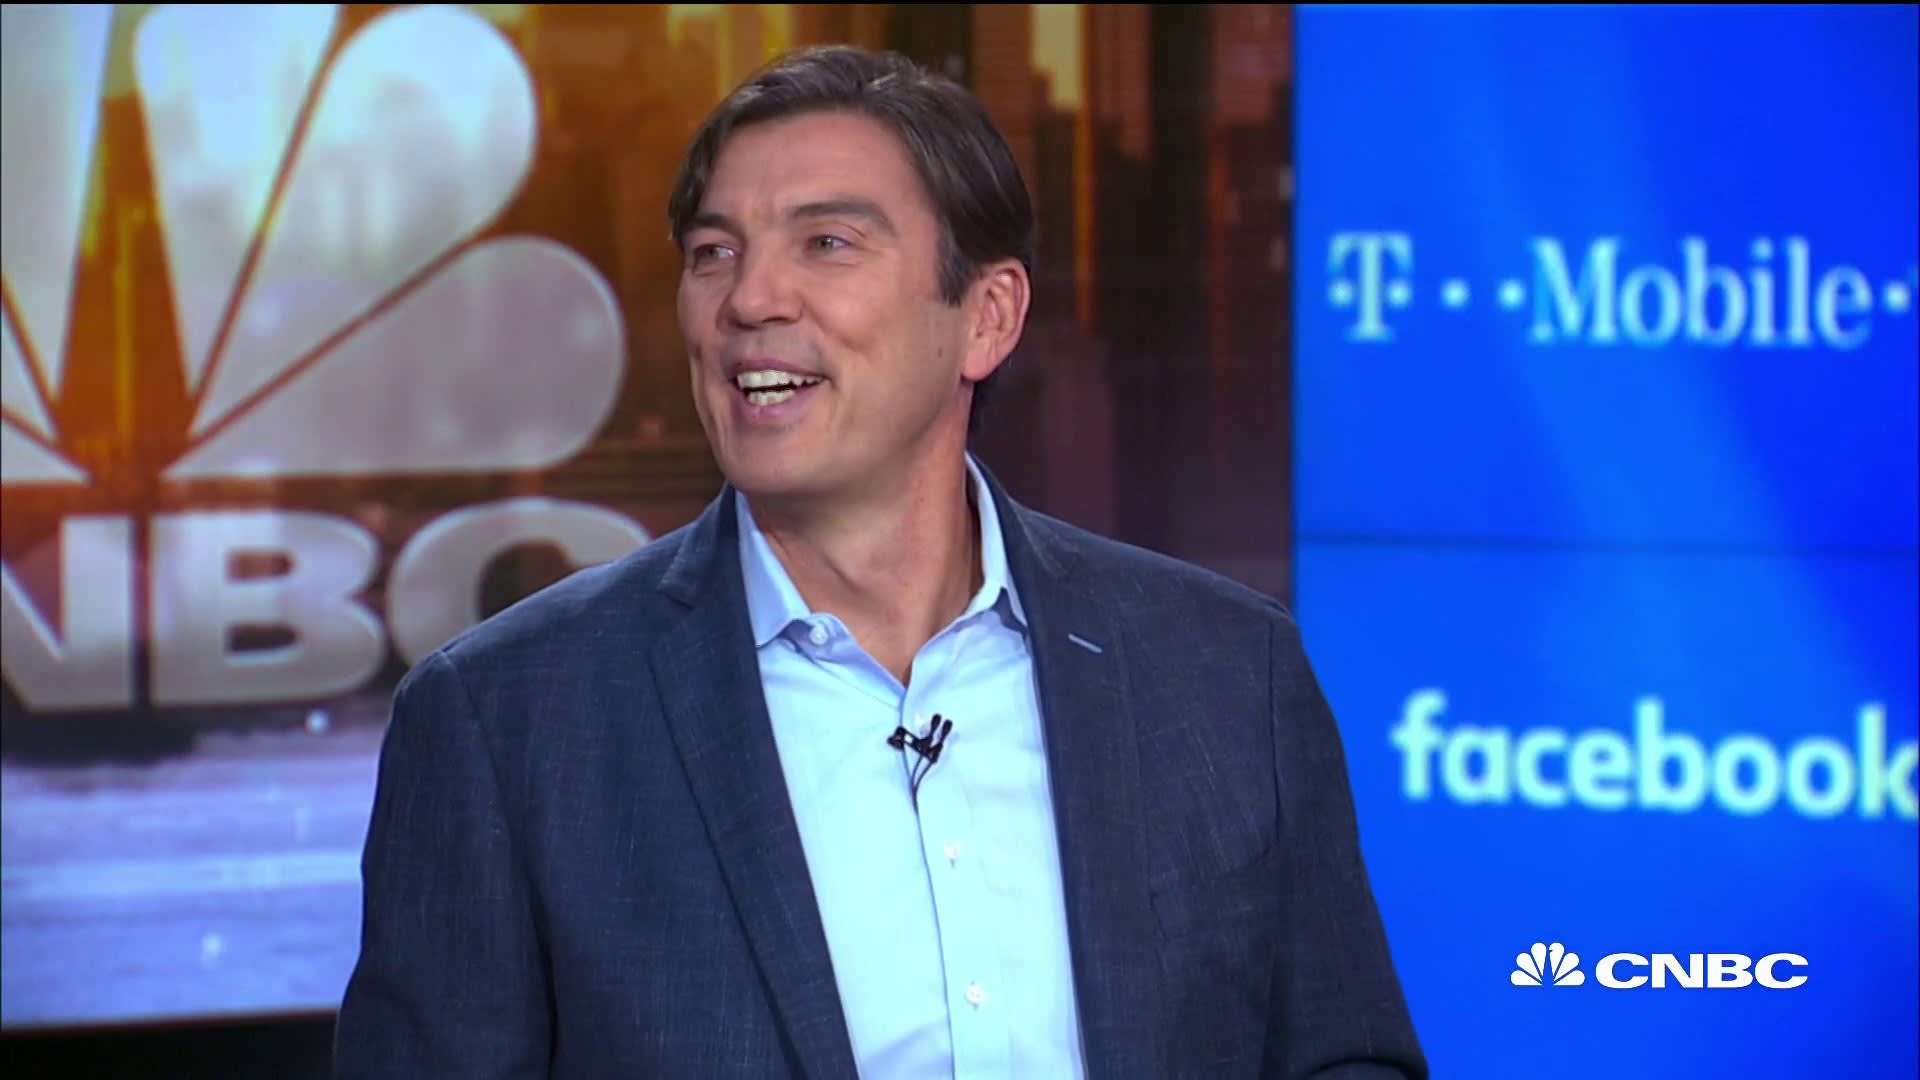 Watch CNBC's full interview with former AOL CEO Tim Armstrong - CNBC